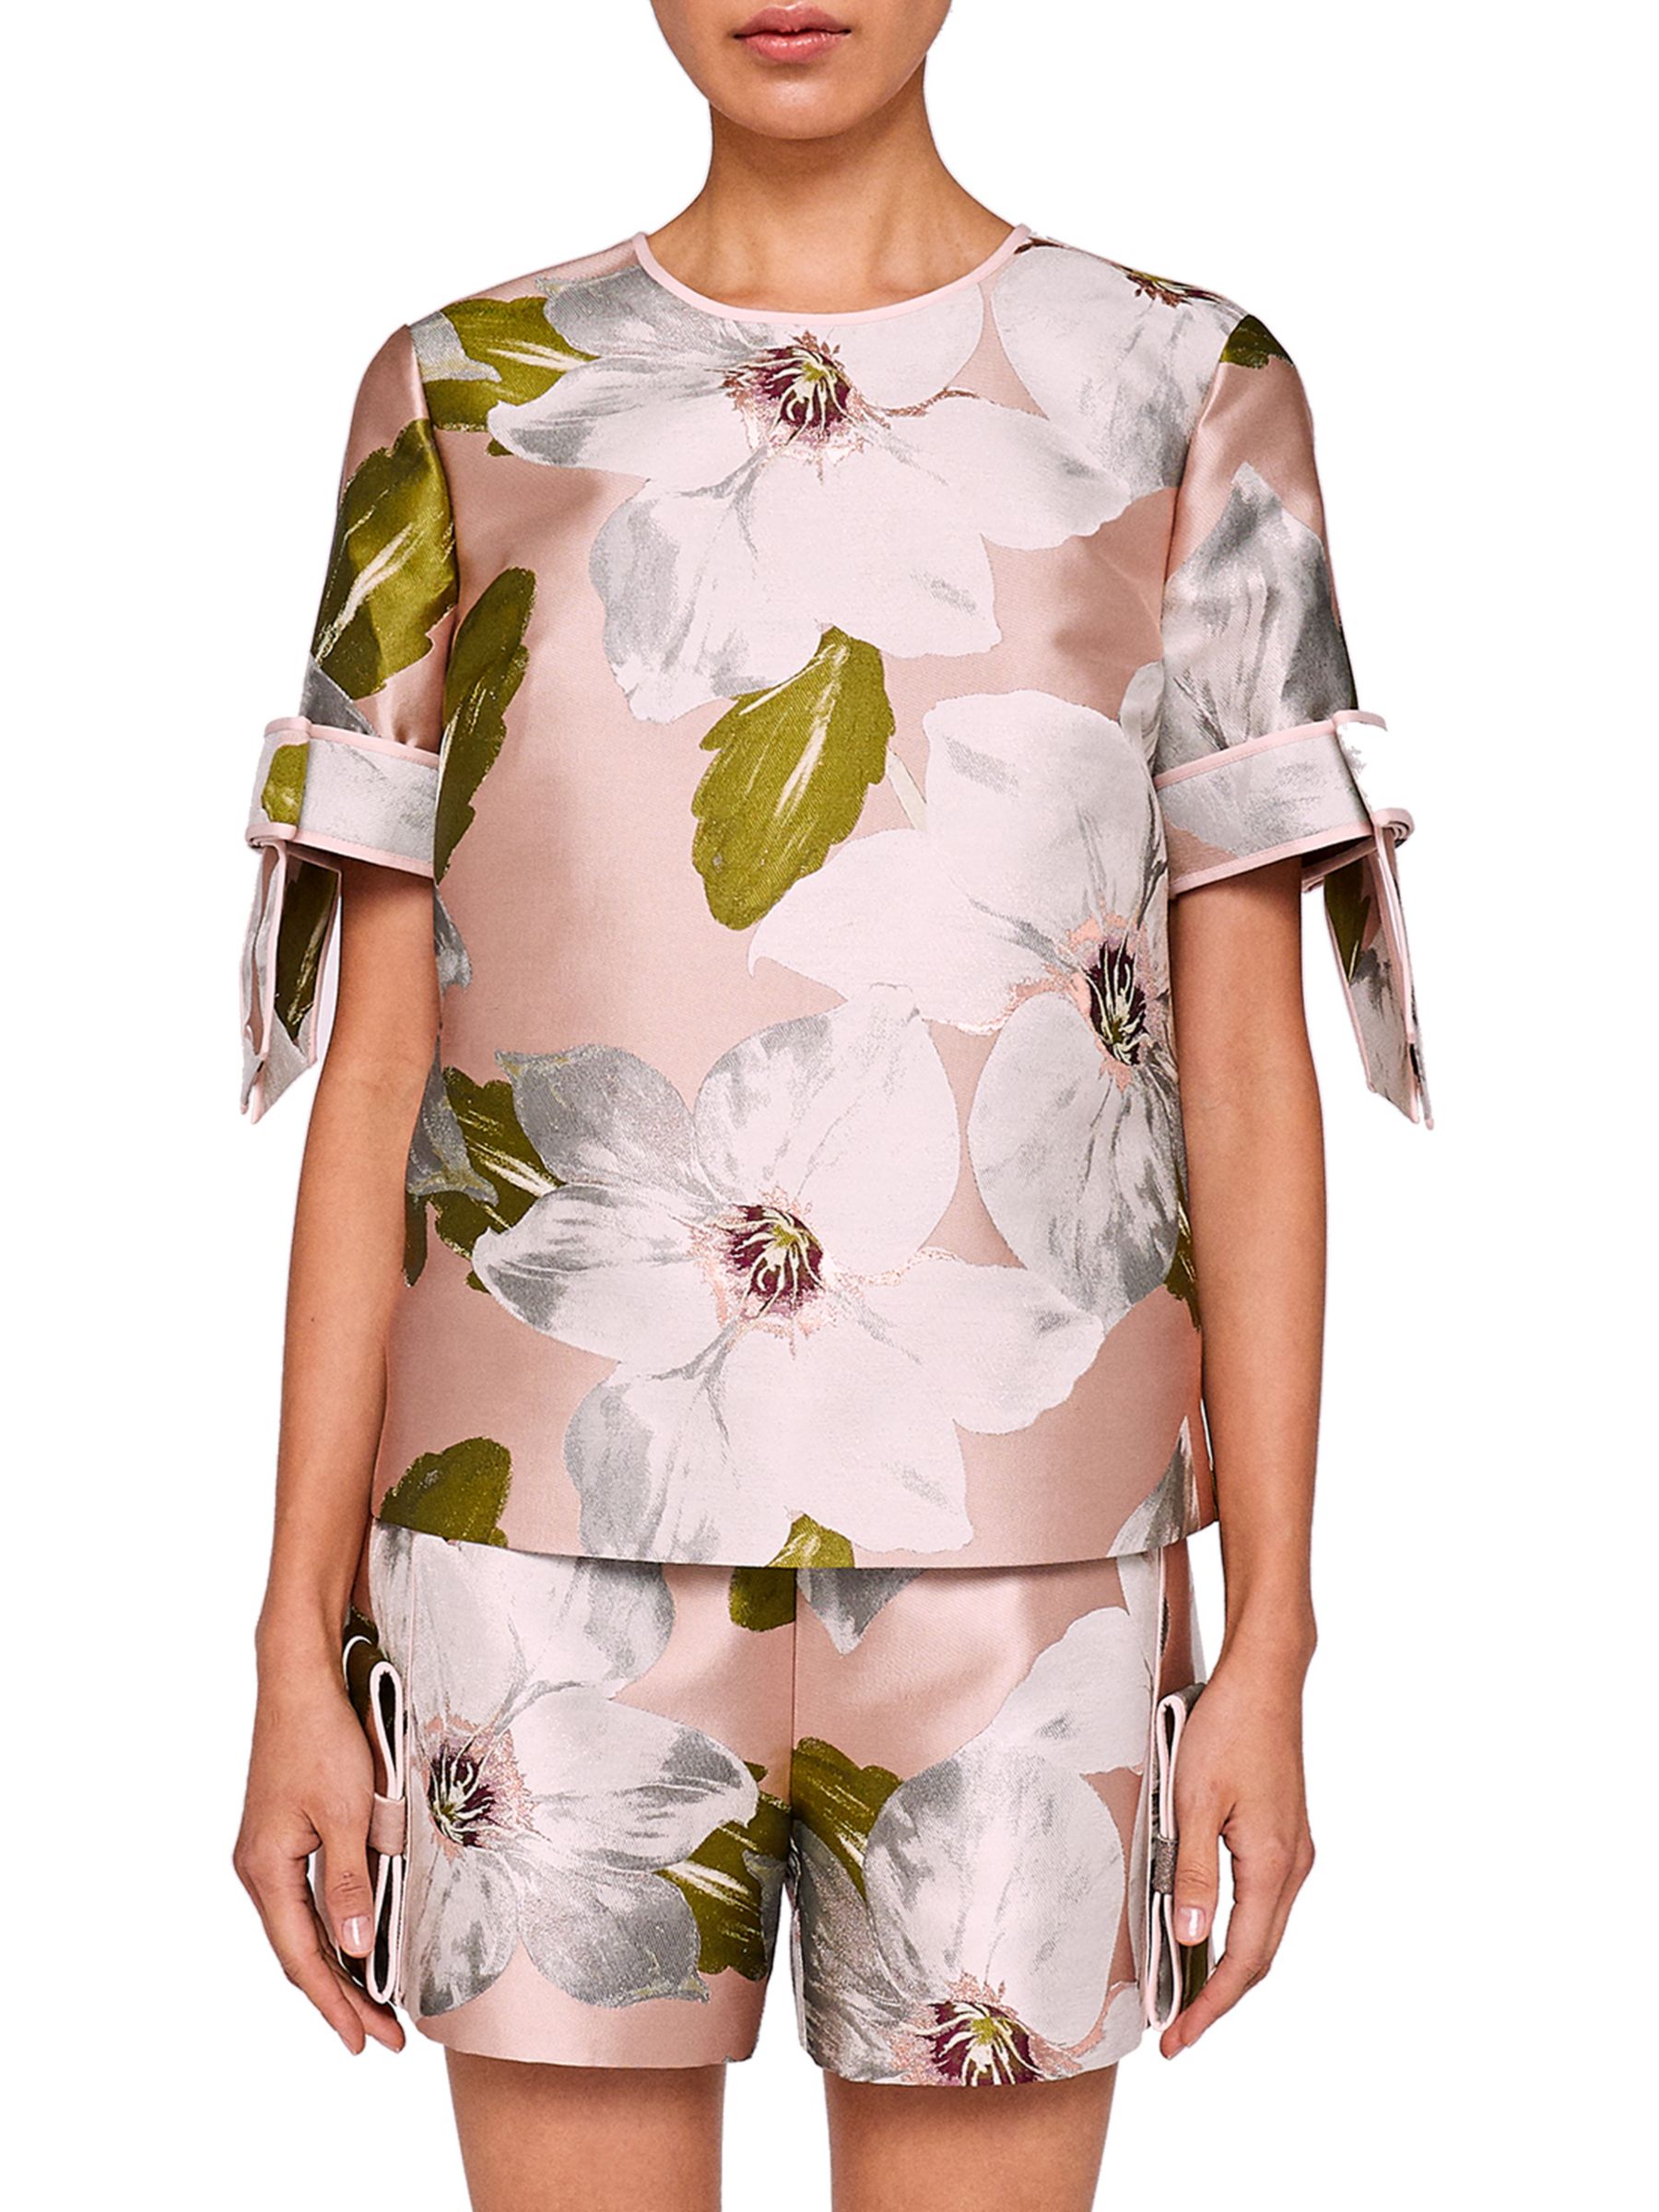 Ted Baker Caytey Chatsworth Bloom Top, Dusky Pink at John Lewis & Partners